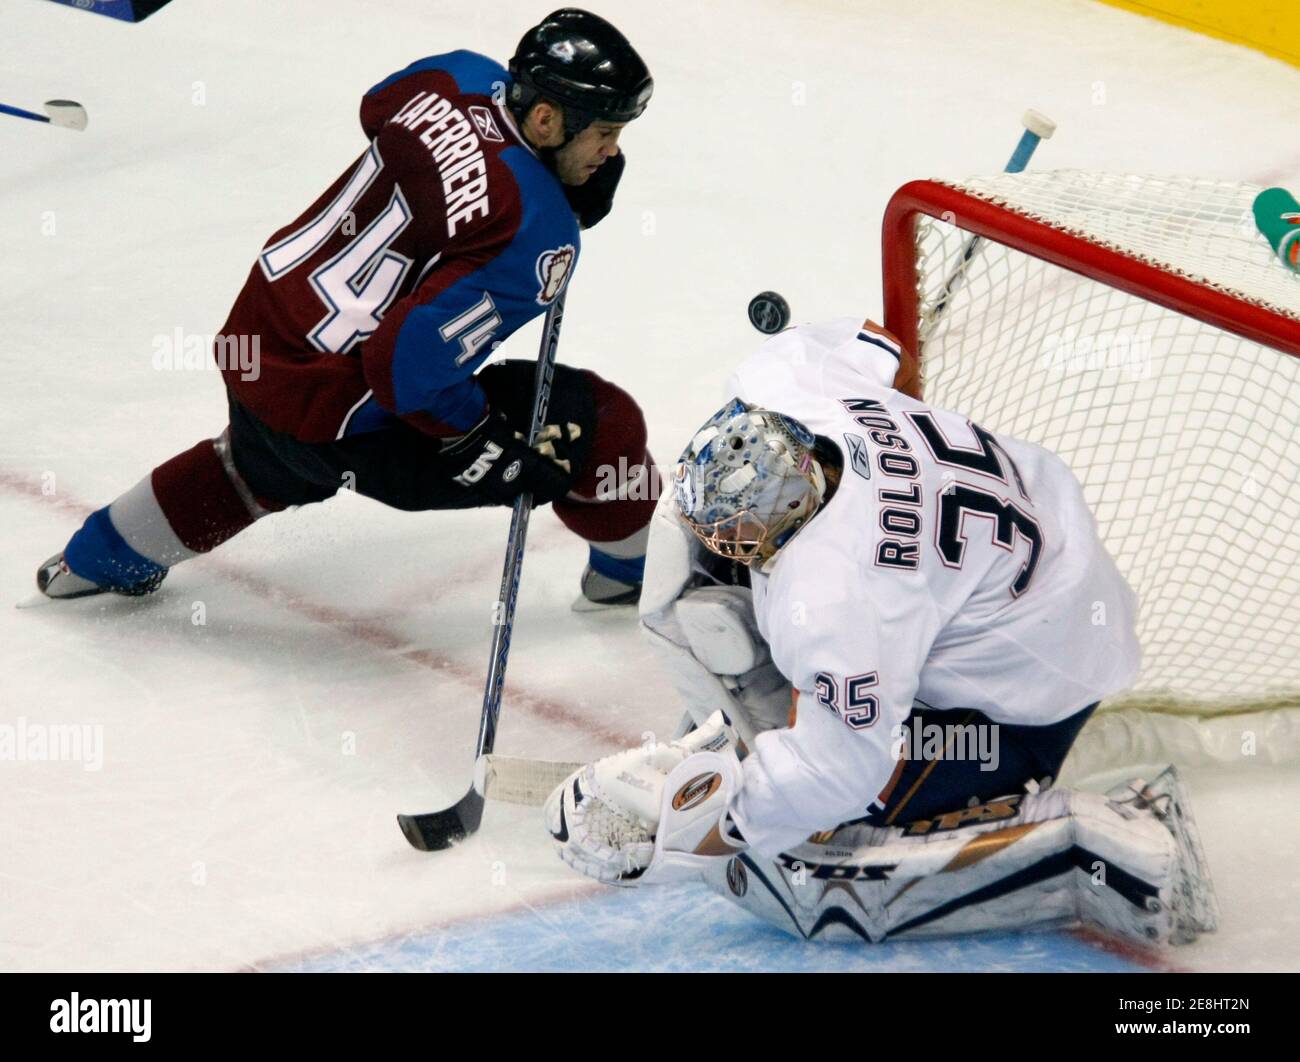 Colorado Avalanche winger Ian Laperriere (L) nearly rolls the puck over the shoulder of Edmonton Oilers goaltender Dwayne Roloson in the third period of their NHL hockey game in Denver November 7, 2007. REUTERS/Rick Wilking (UNITED STATES) Stock Photo